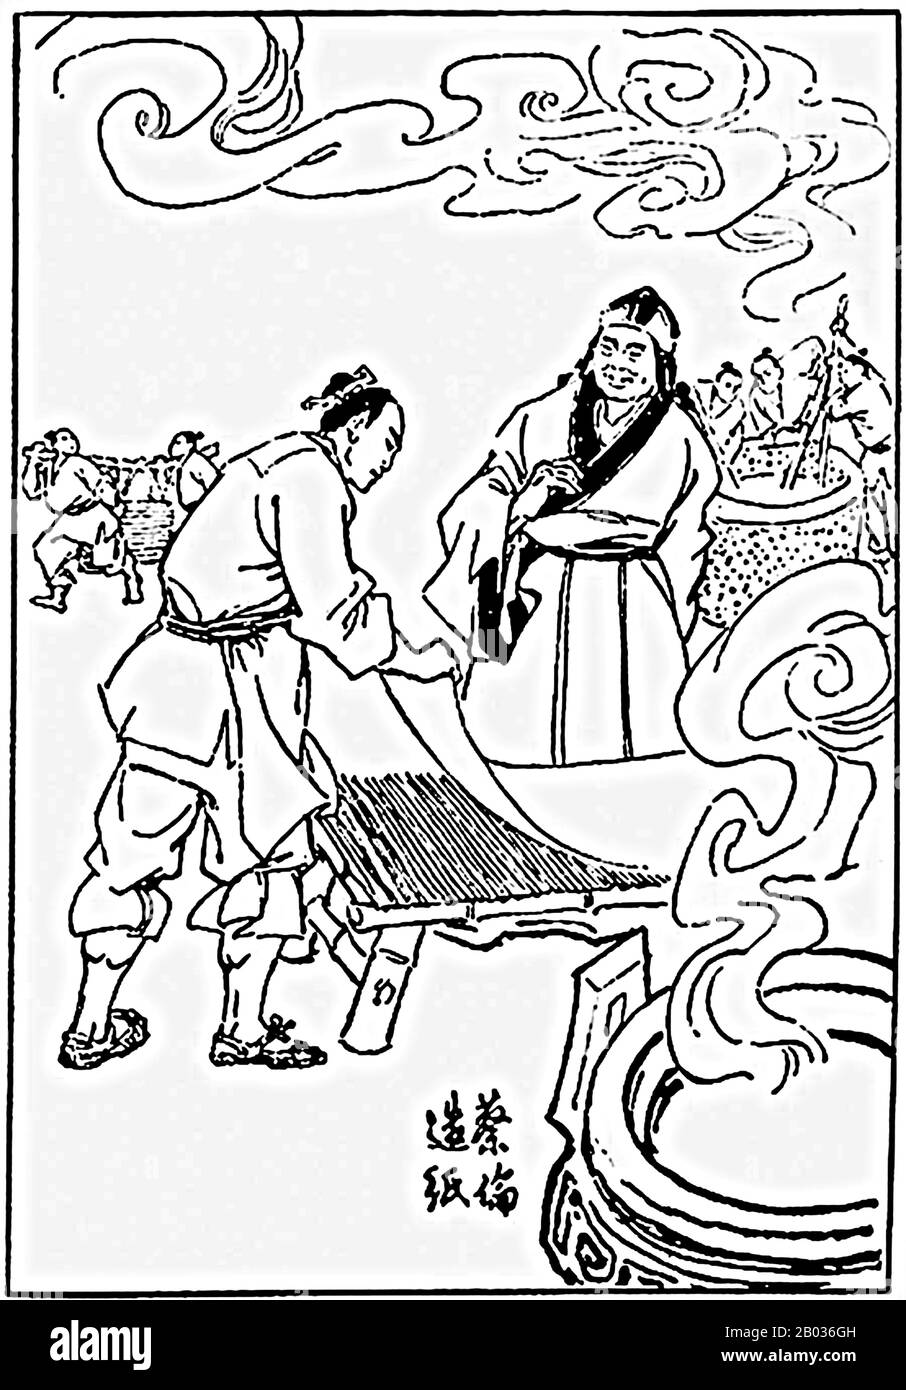 Cai Lun (ca. 50 CE – 121), courtesy name Jingzhong, was a Chinese eunuch and political official. He is traditionally regarded as the inventor of paper and the papermaking process, in forms recognizable in modern times as paper (as opposed to papyrus).  Although early forms of paper had existed in China since the 2nd century BCE, he was responsible for the first significant improvement and standardization of paper-making by adding essential new materials into its composition. Stock Photo